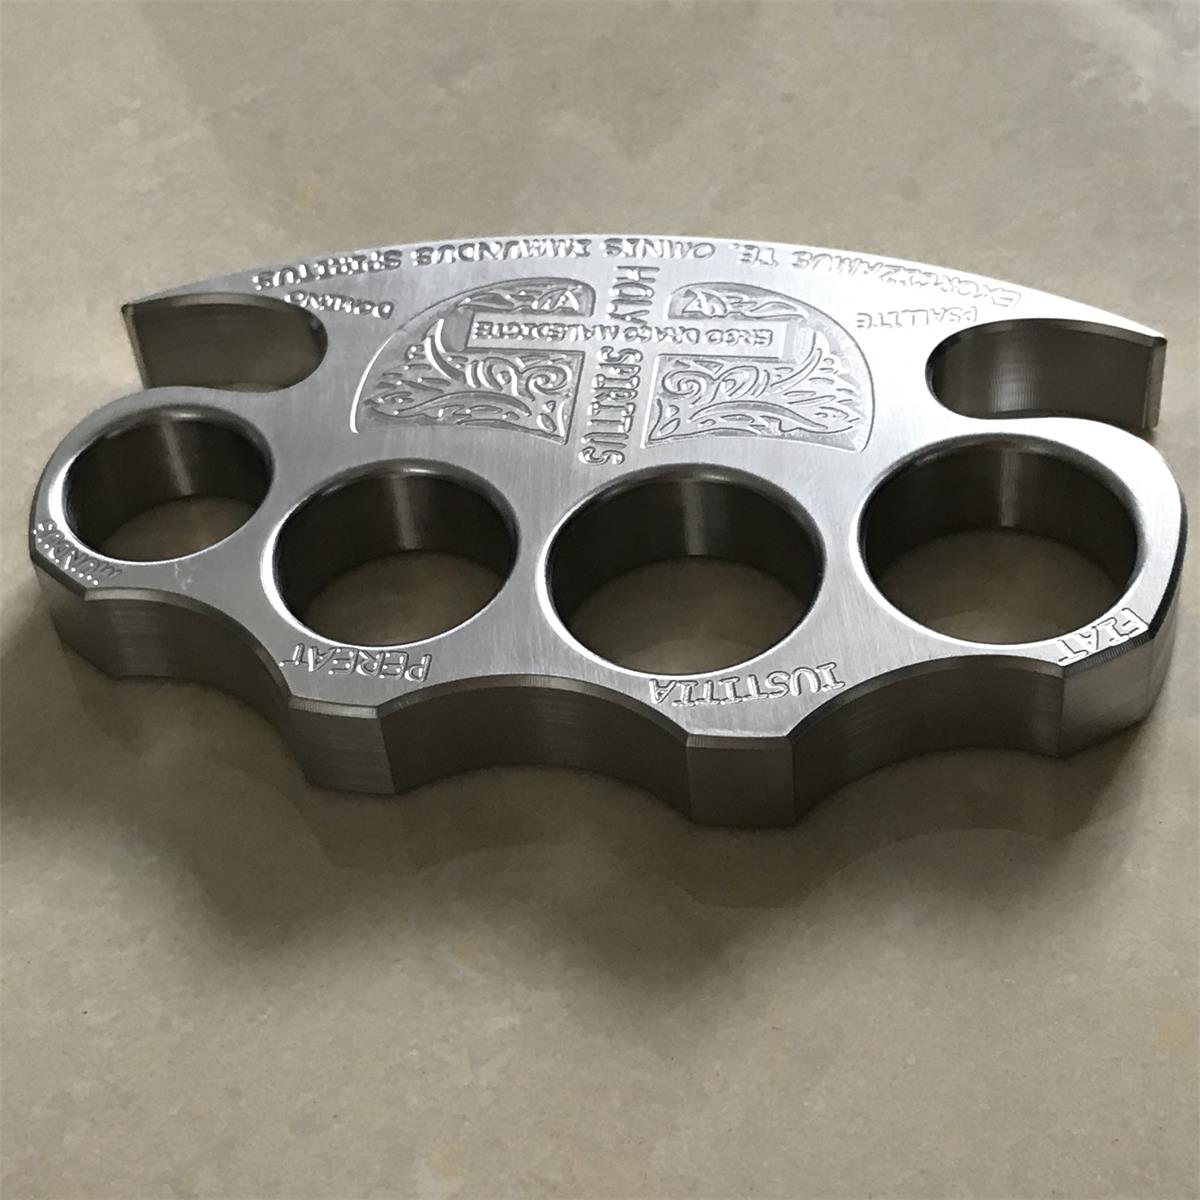 Precision Solid Steel Warrior knuckle Duster